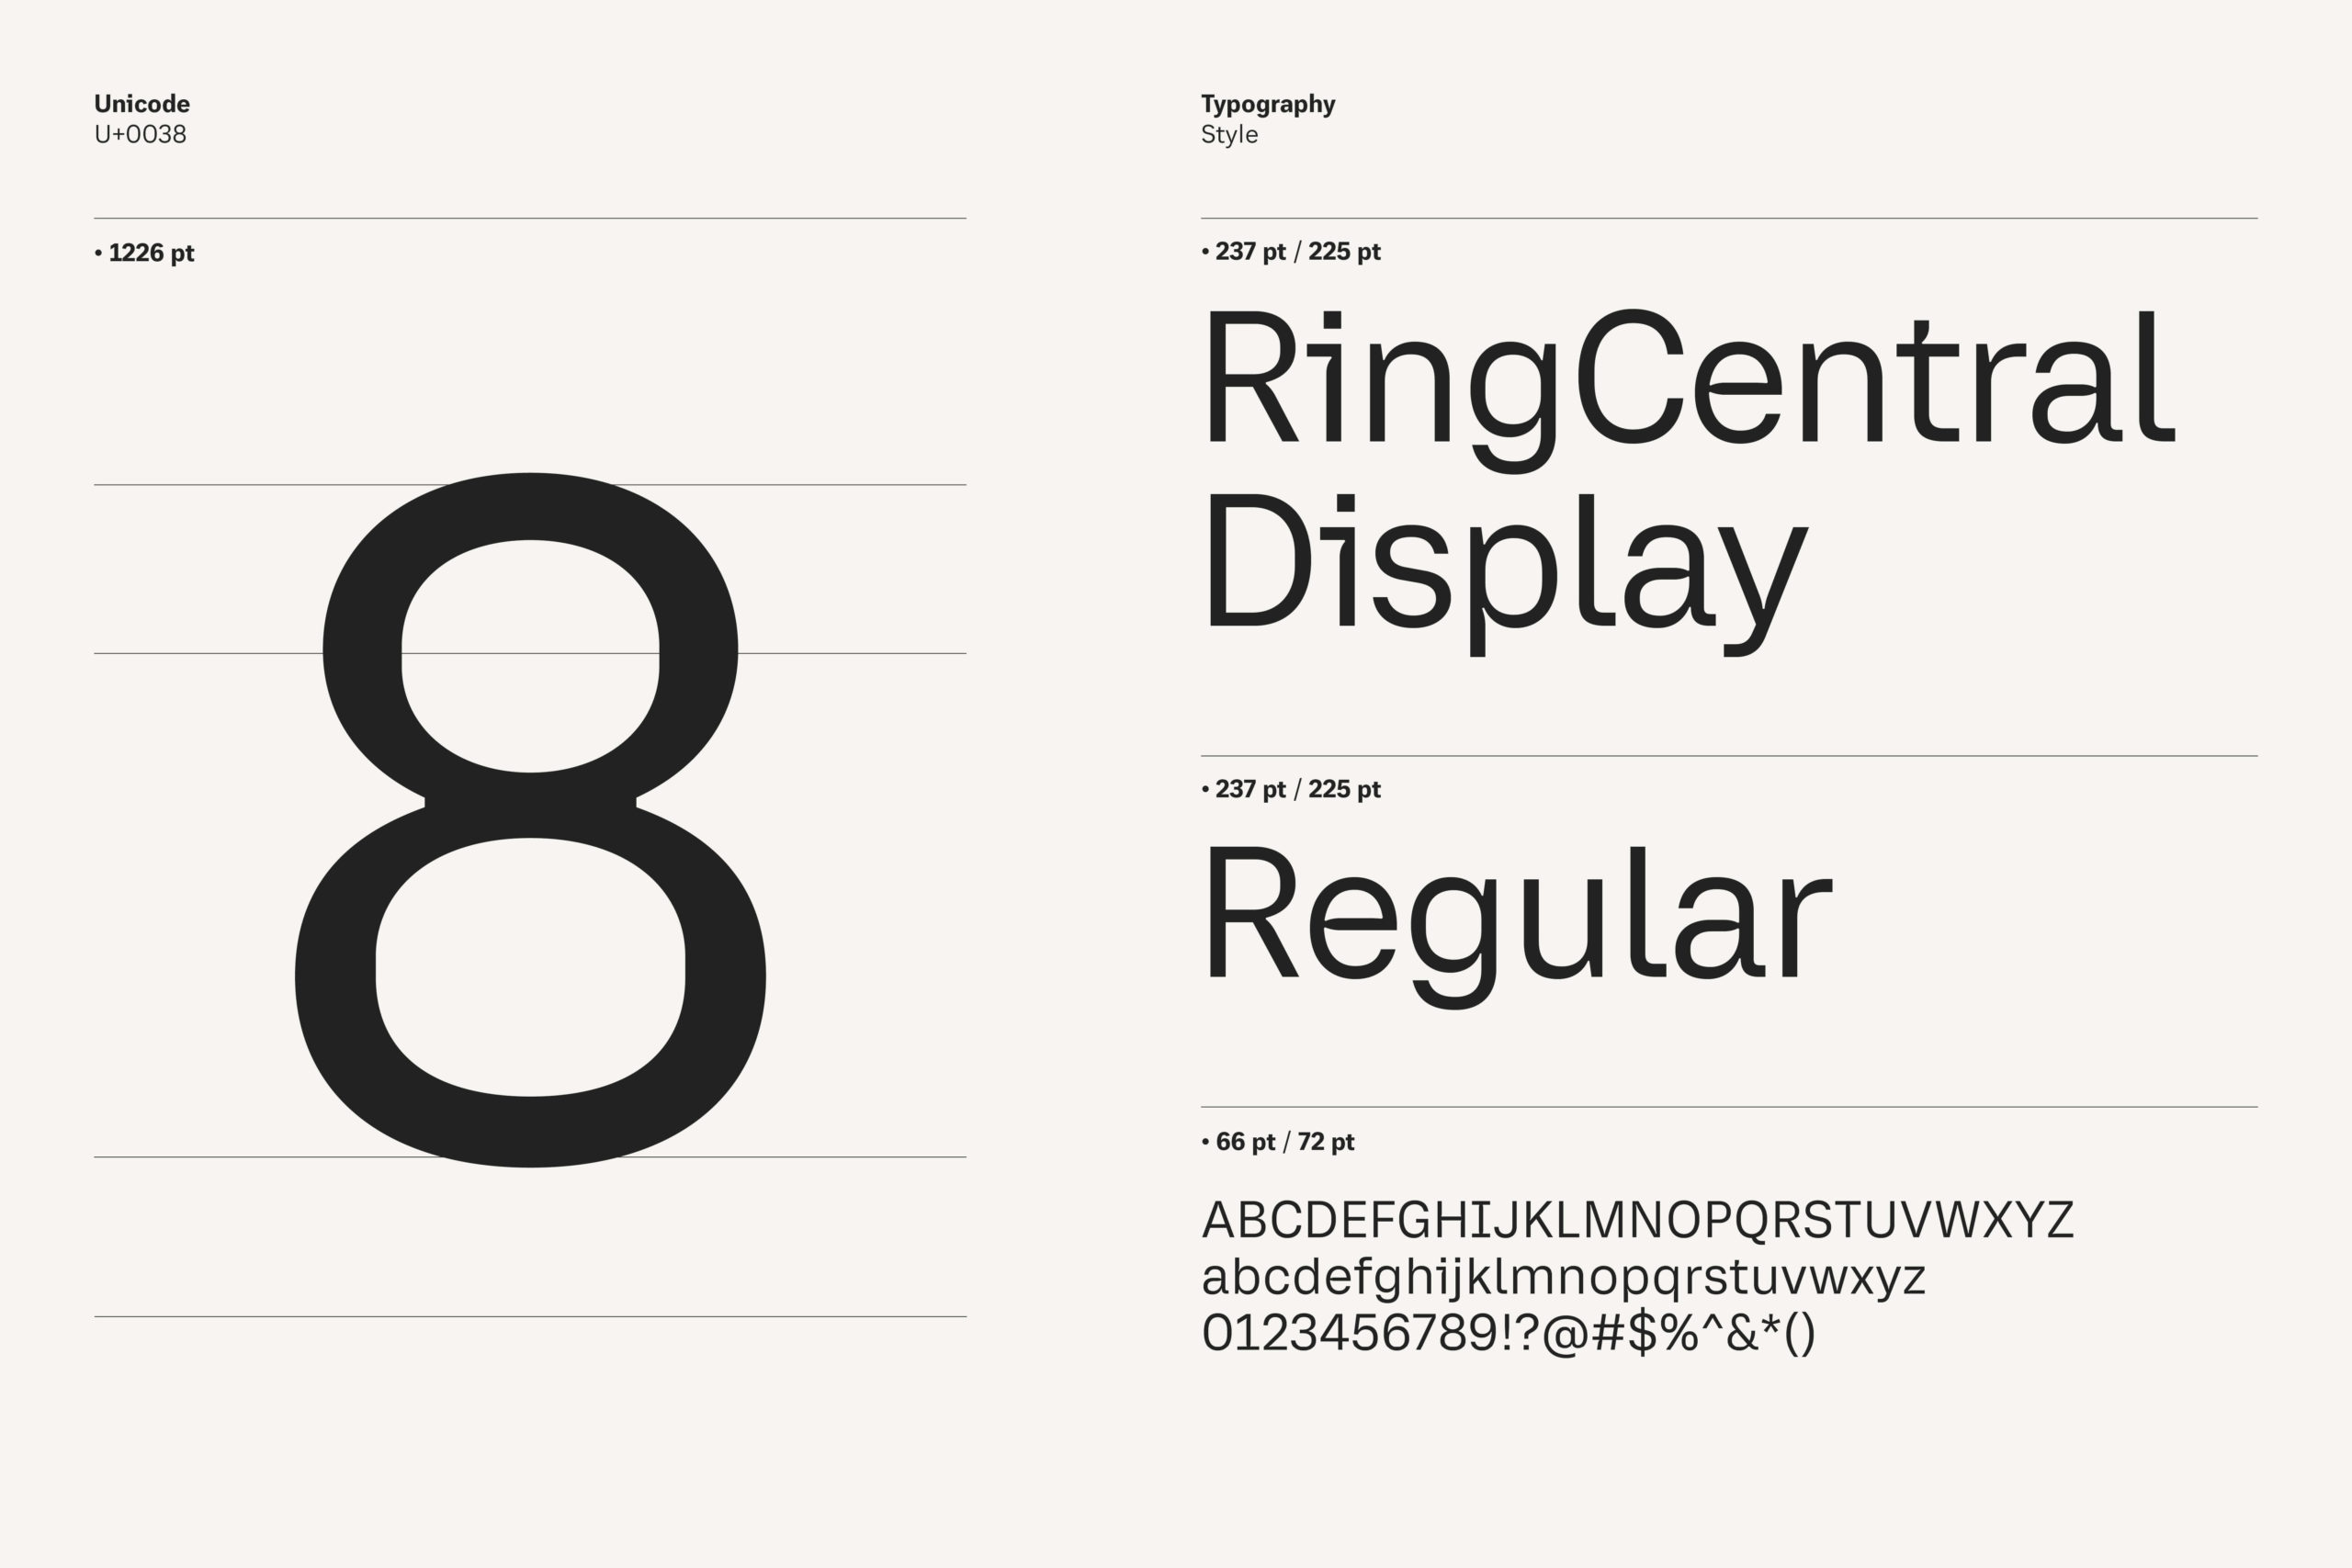 RingCentral Display_Typeface_09142216